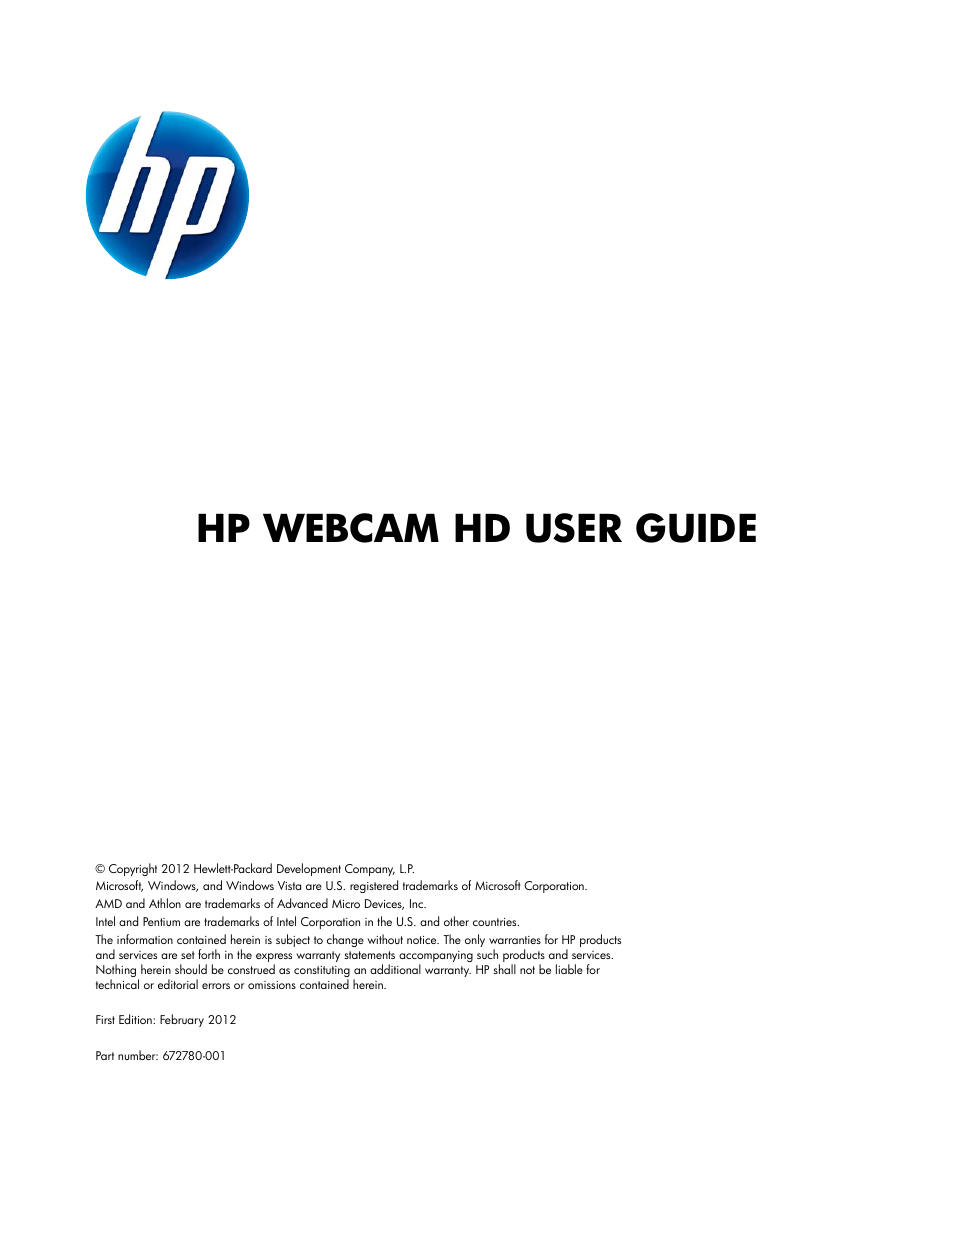 HP HD 2300 Webcam User Manual | 12 pages